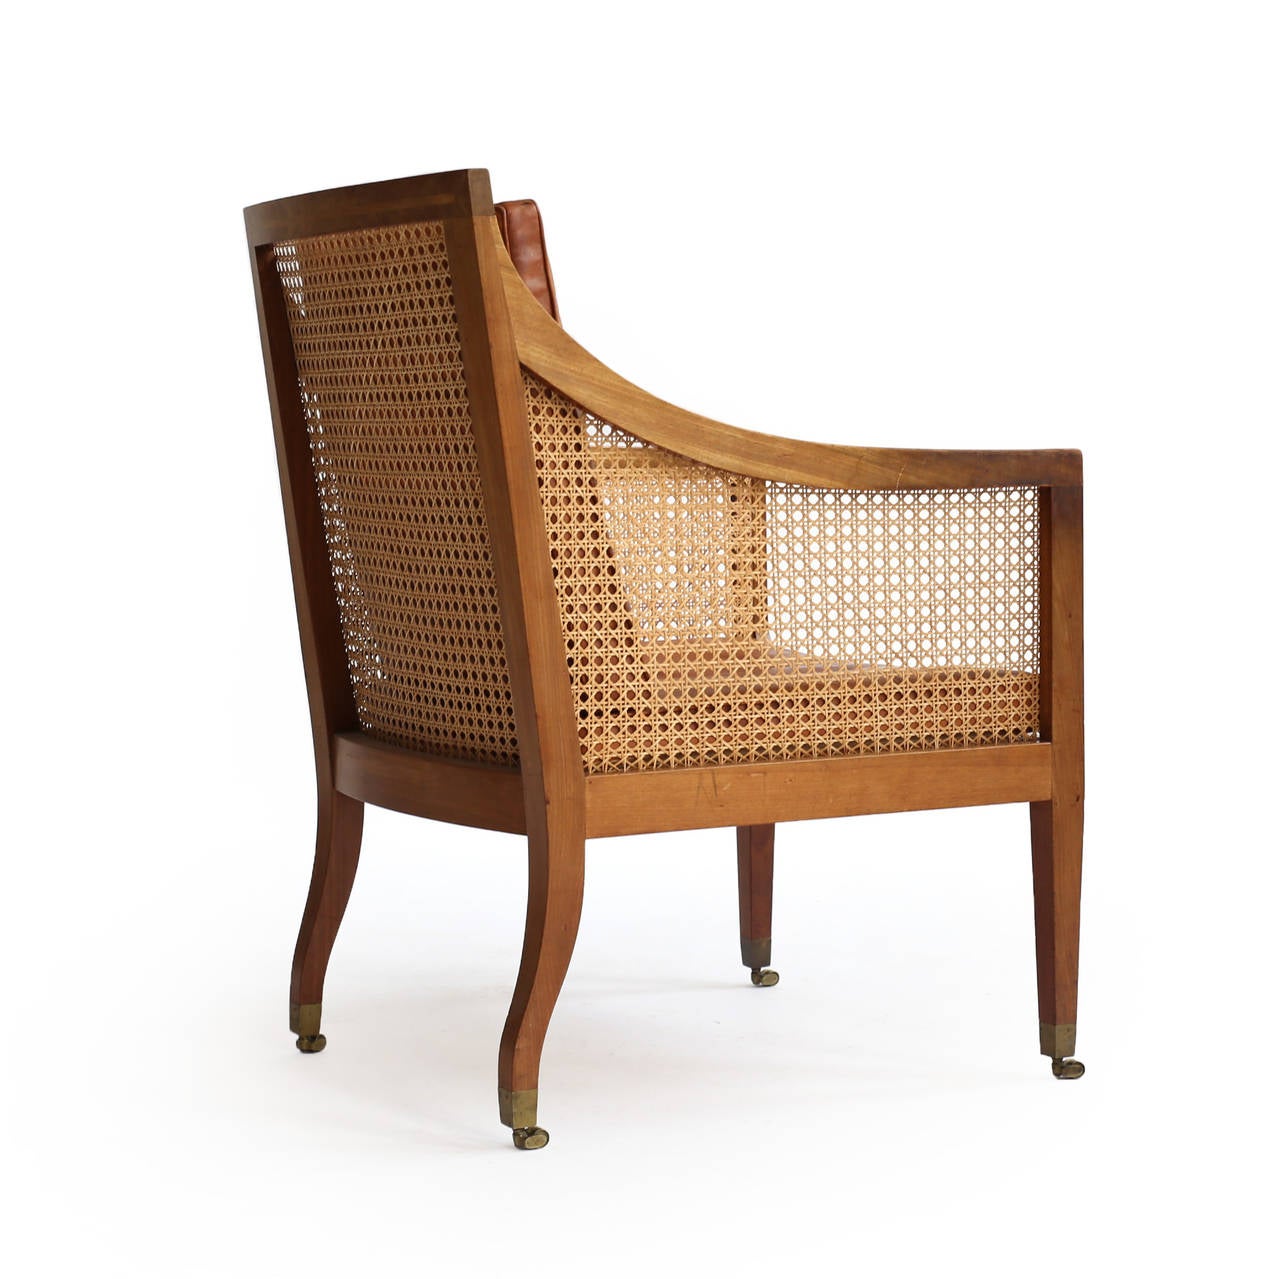 Kaare Klint 'Bergere' chair. 

Mahogany frame with rosewood inlays, woven French-style cane and brass casters. Original loose cushions upholstered with Niger leather. 

Designed by Kaare Klint, 1932, manufactured and marked by cabinetmaker